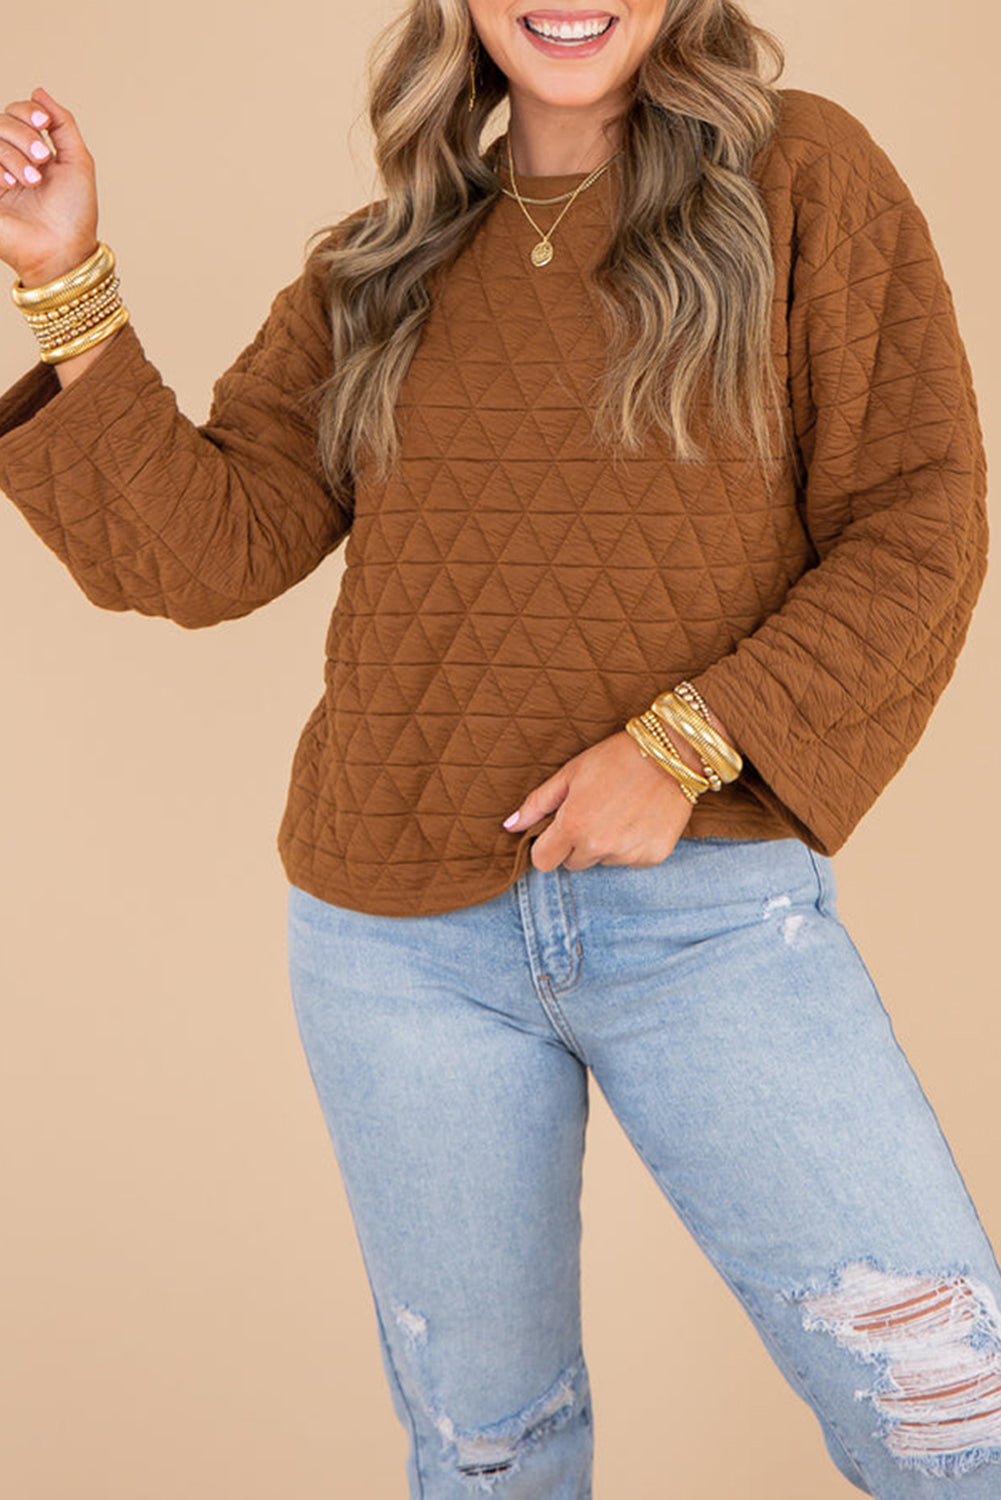 Chestnut/Shirt 95%Polyester+5%Elastane Solid Quilted Pullover and Pants Outfit Set, Shirt, or Hoodie- various colors - women's pants set at TFC&H Co.